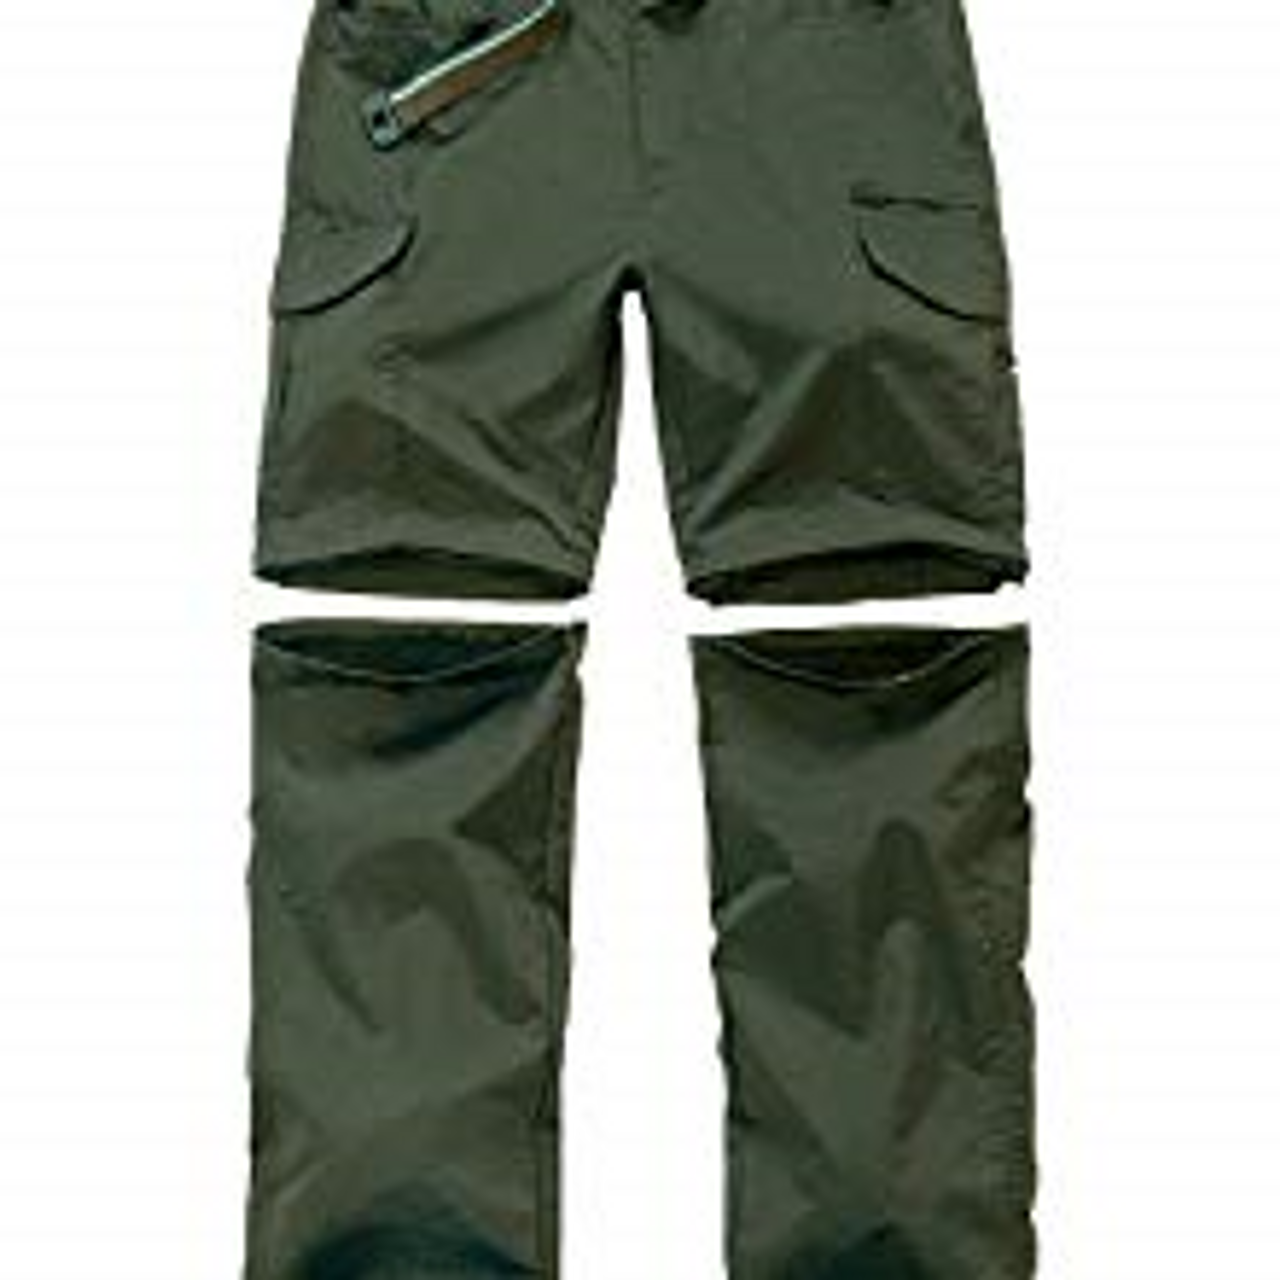 Military wind pants reproduction with zip off legs XL